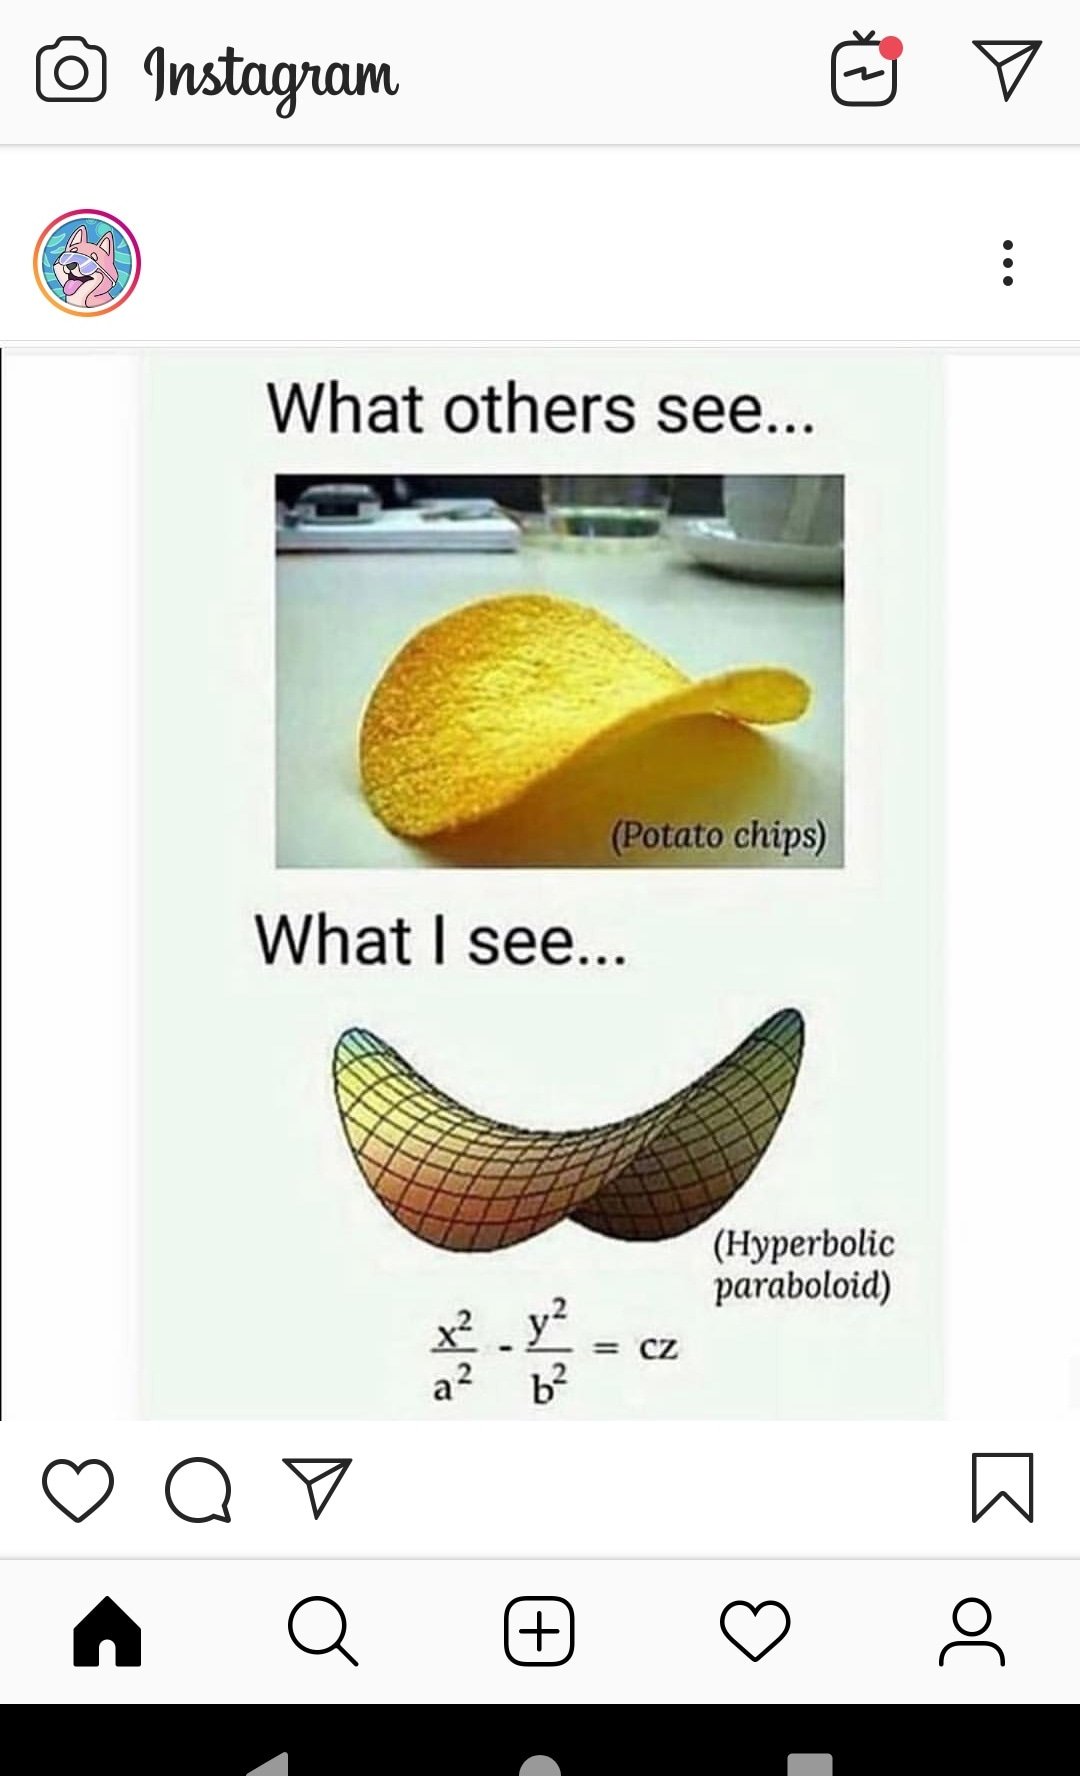 rick and morty smart meme - Instagram V What others see... Potato chips What I see... Hyperbolic paraboloid X. Cz Q V A Q